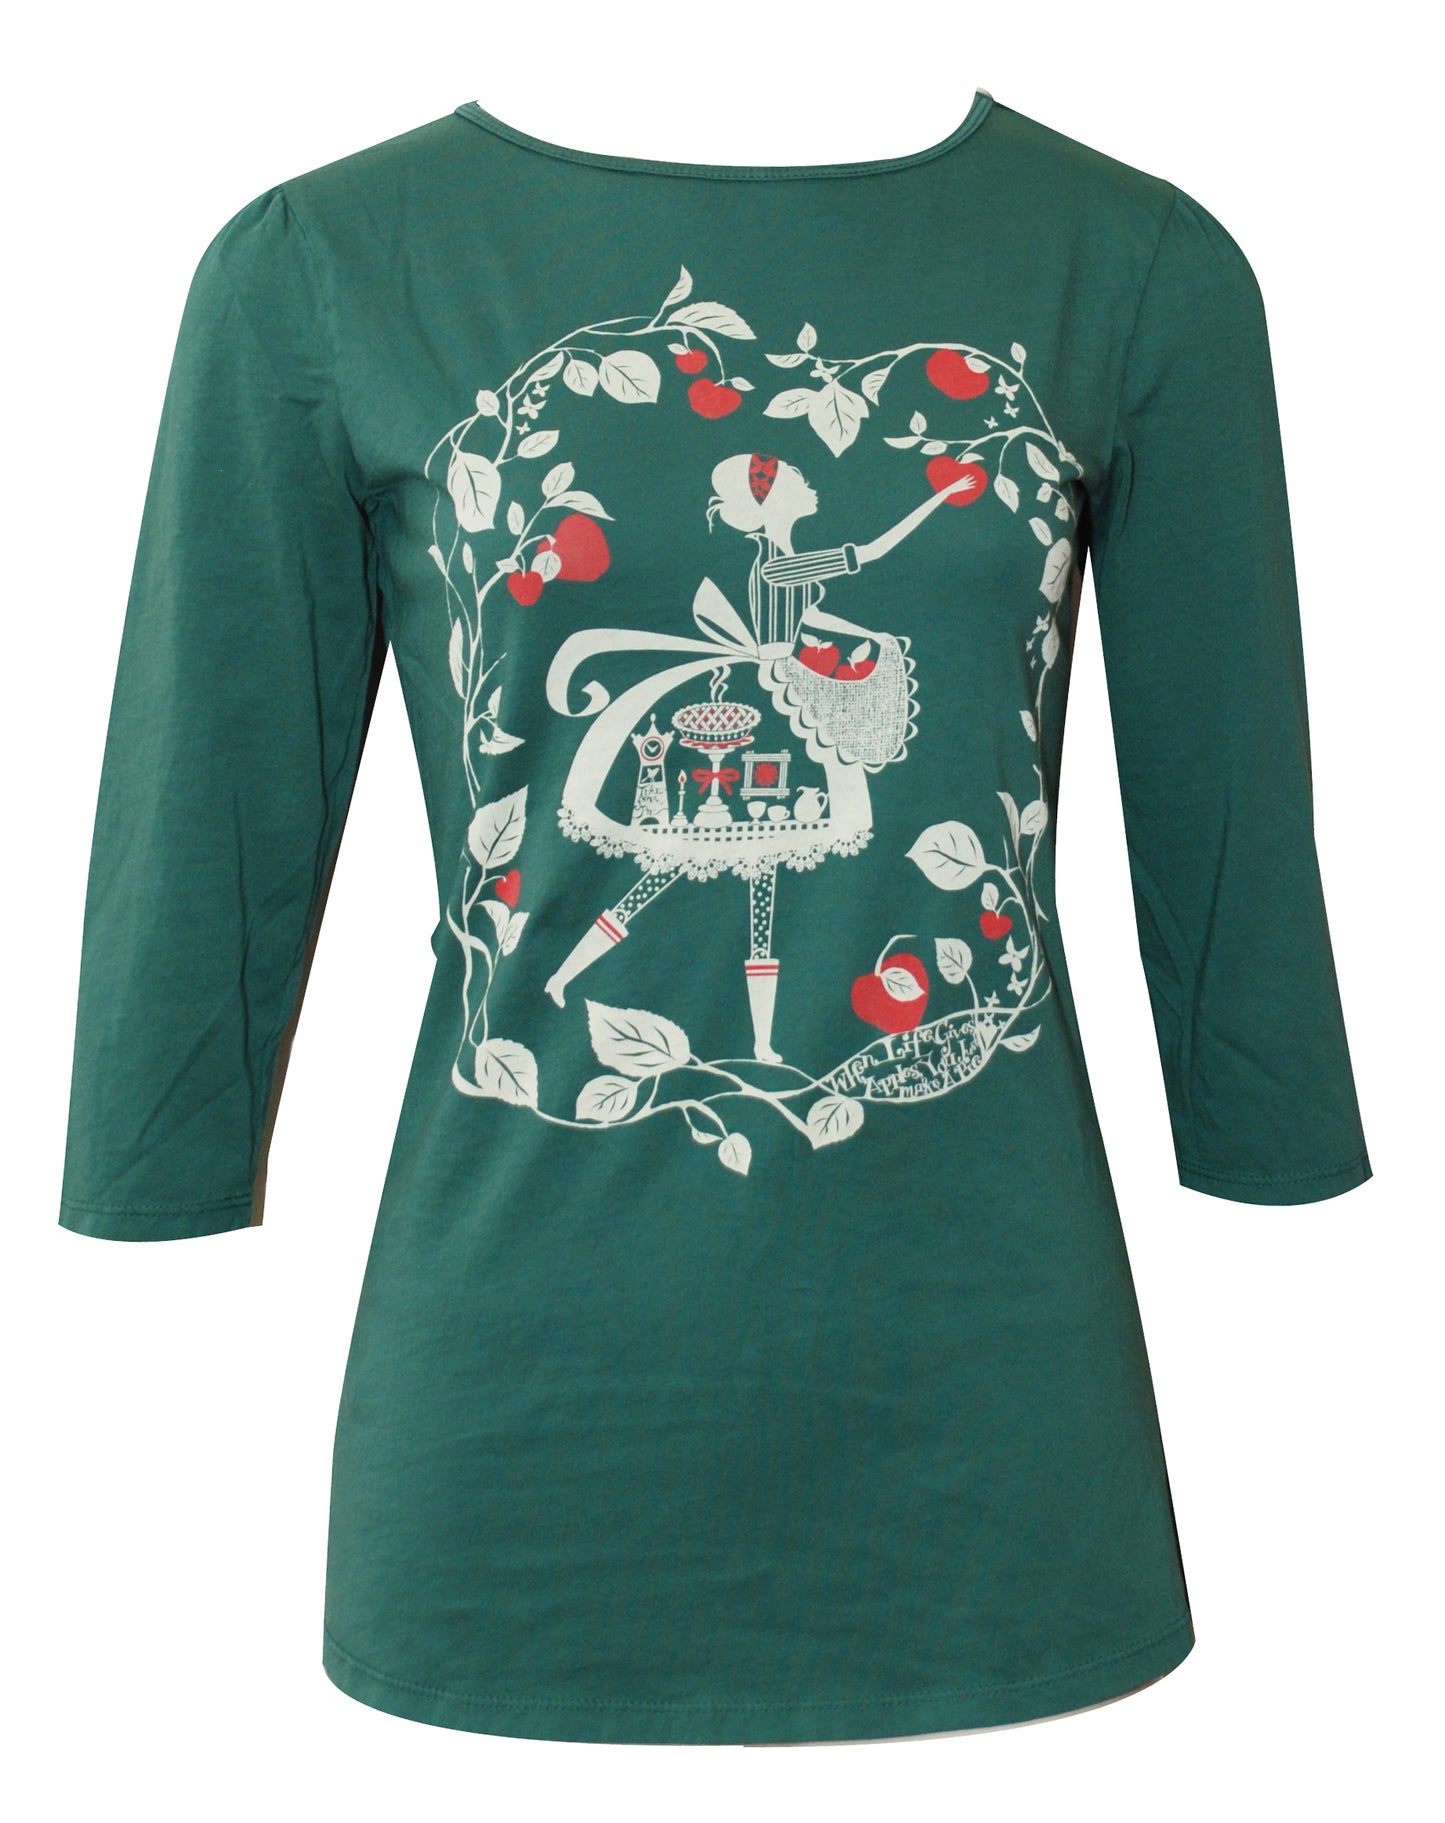 Dark green 3/4 sleeve tee with graphic of apple picking girl and bright red apples